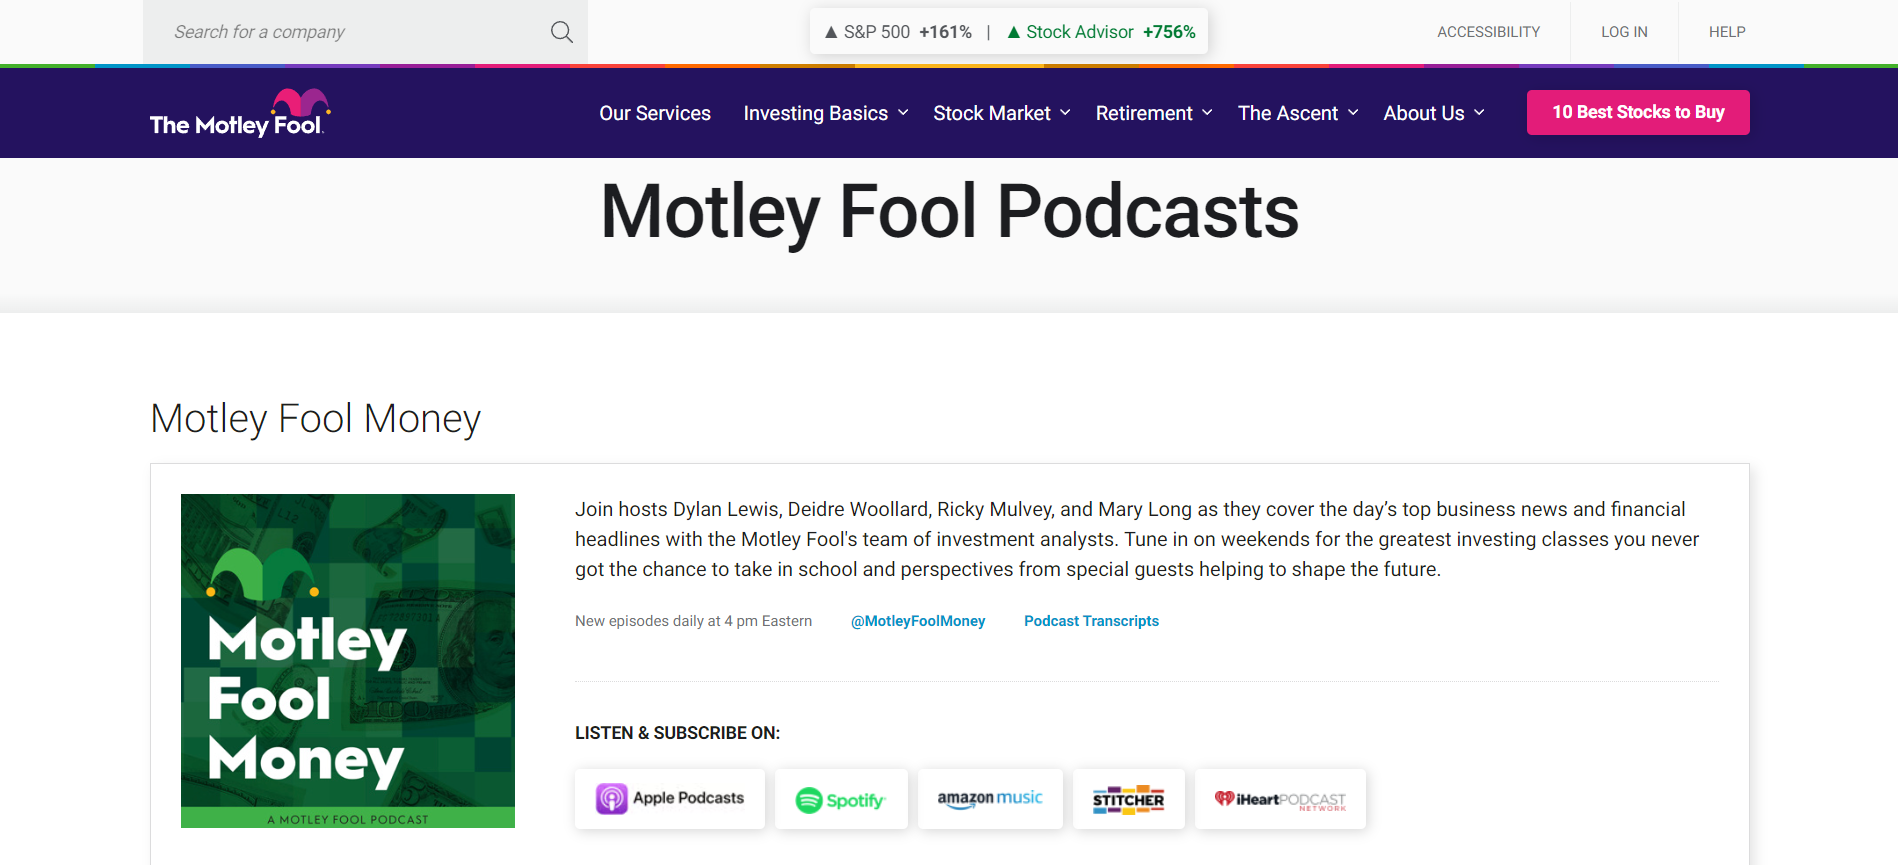 Motley Fool podcasts